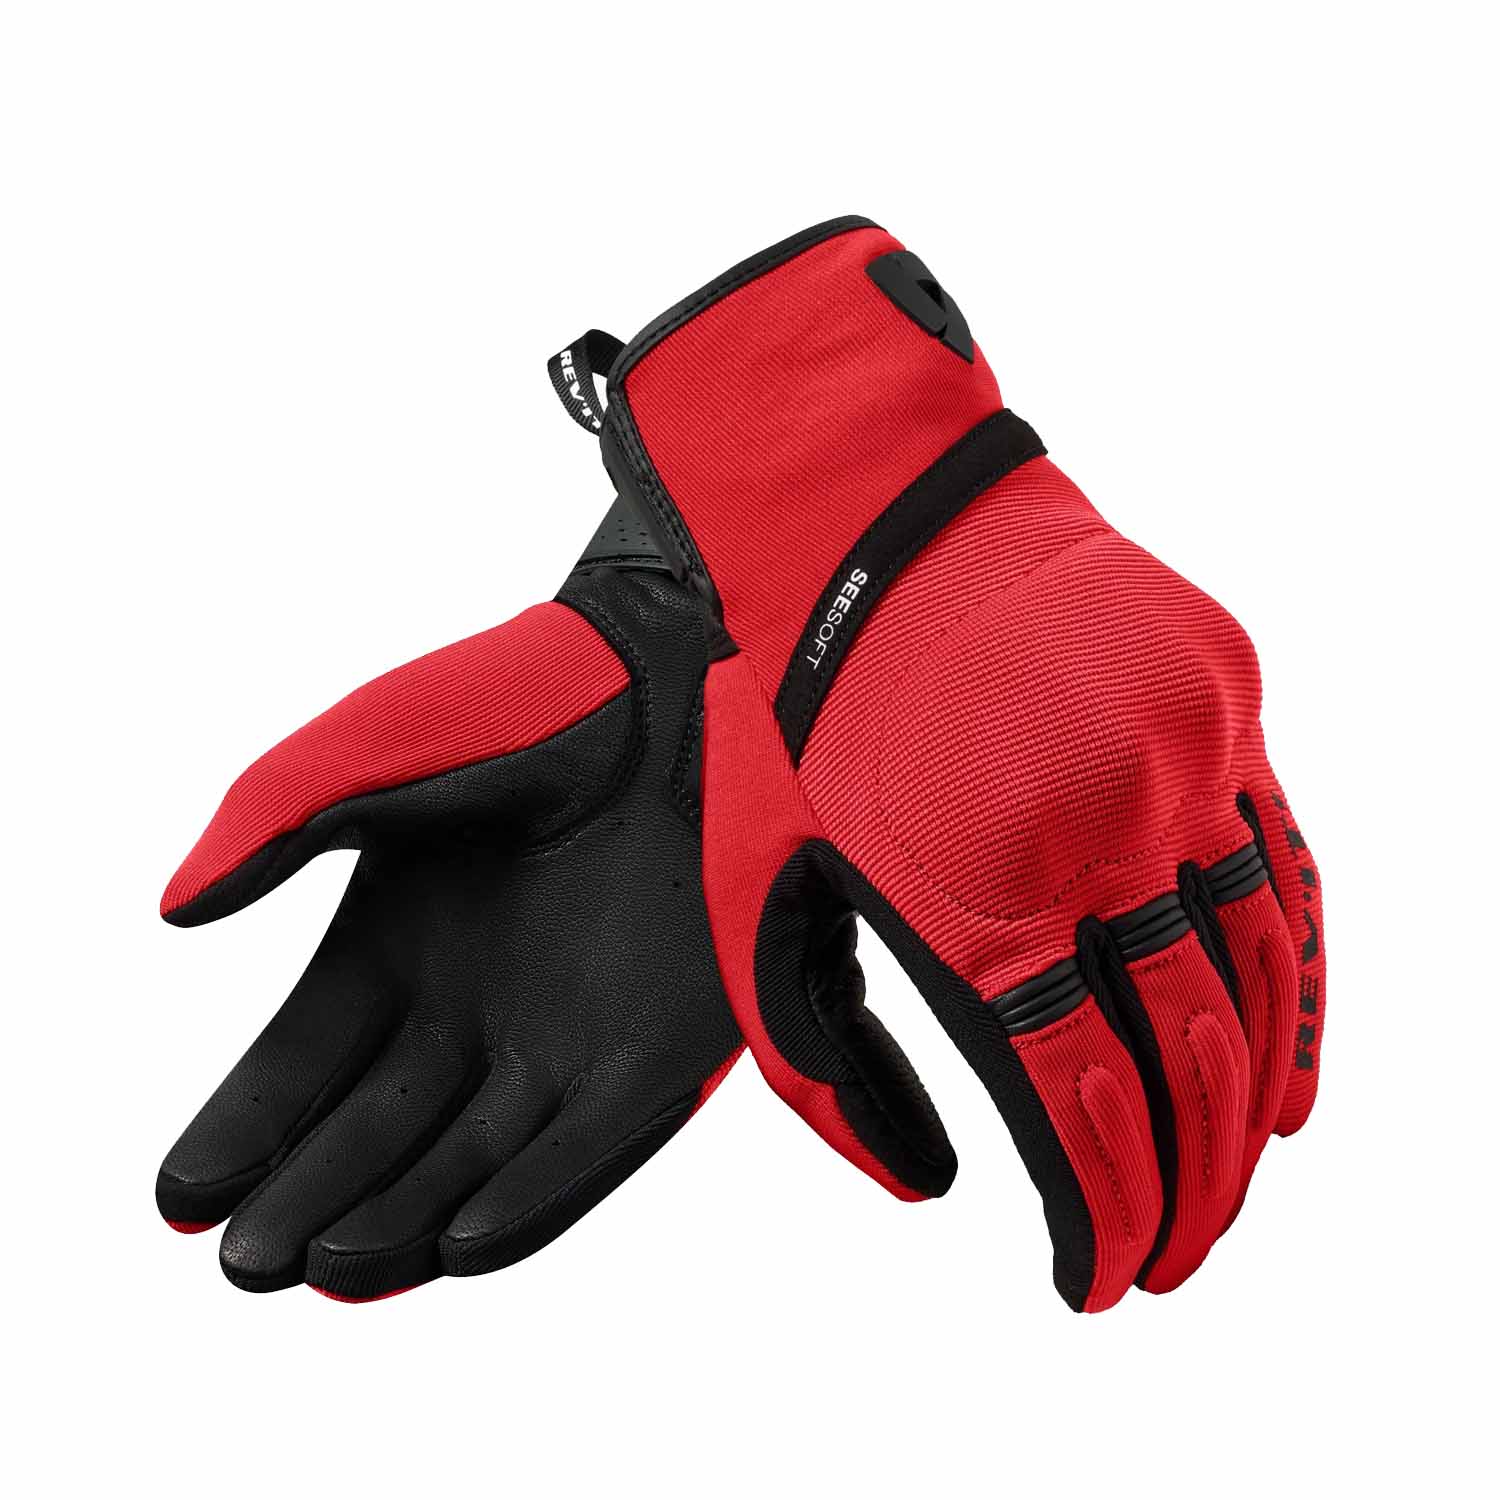 Image of EU REV'IT! Mosca 2 Gloves Red Black Taille L